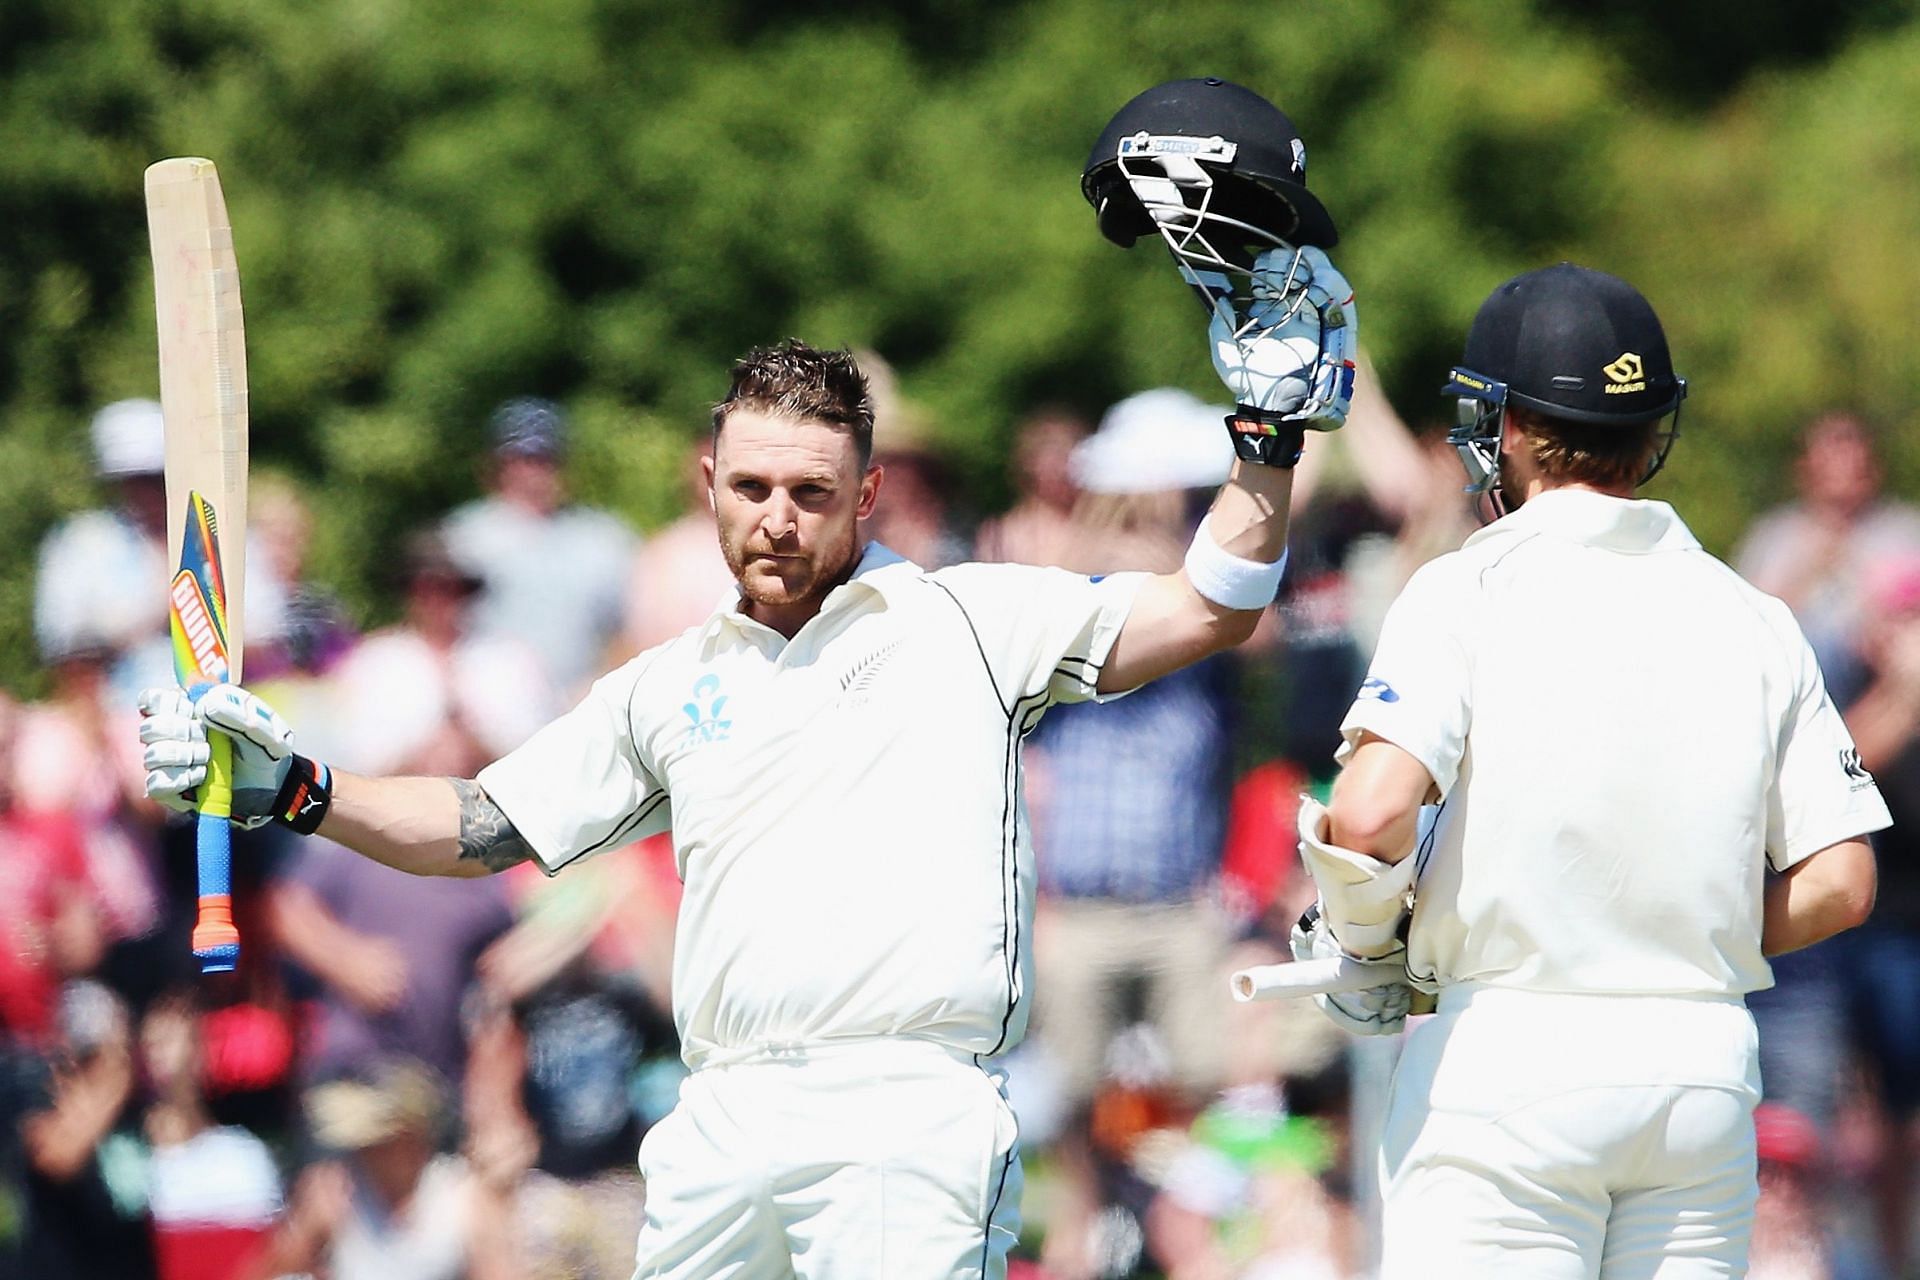 McCullum has smashed 11 sixes in a Test innings twice in 2014